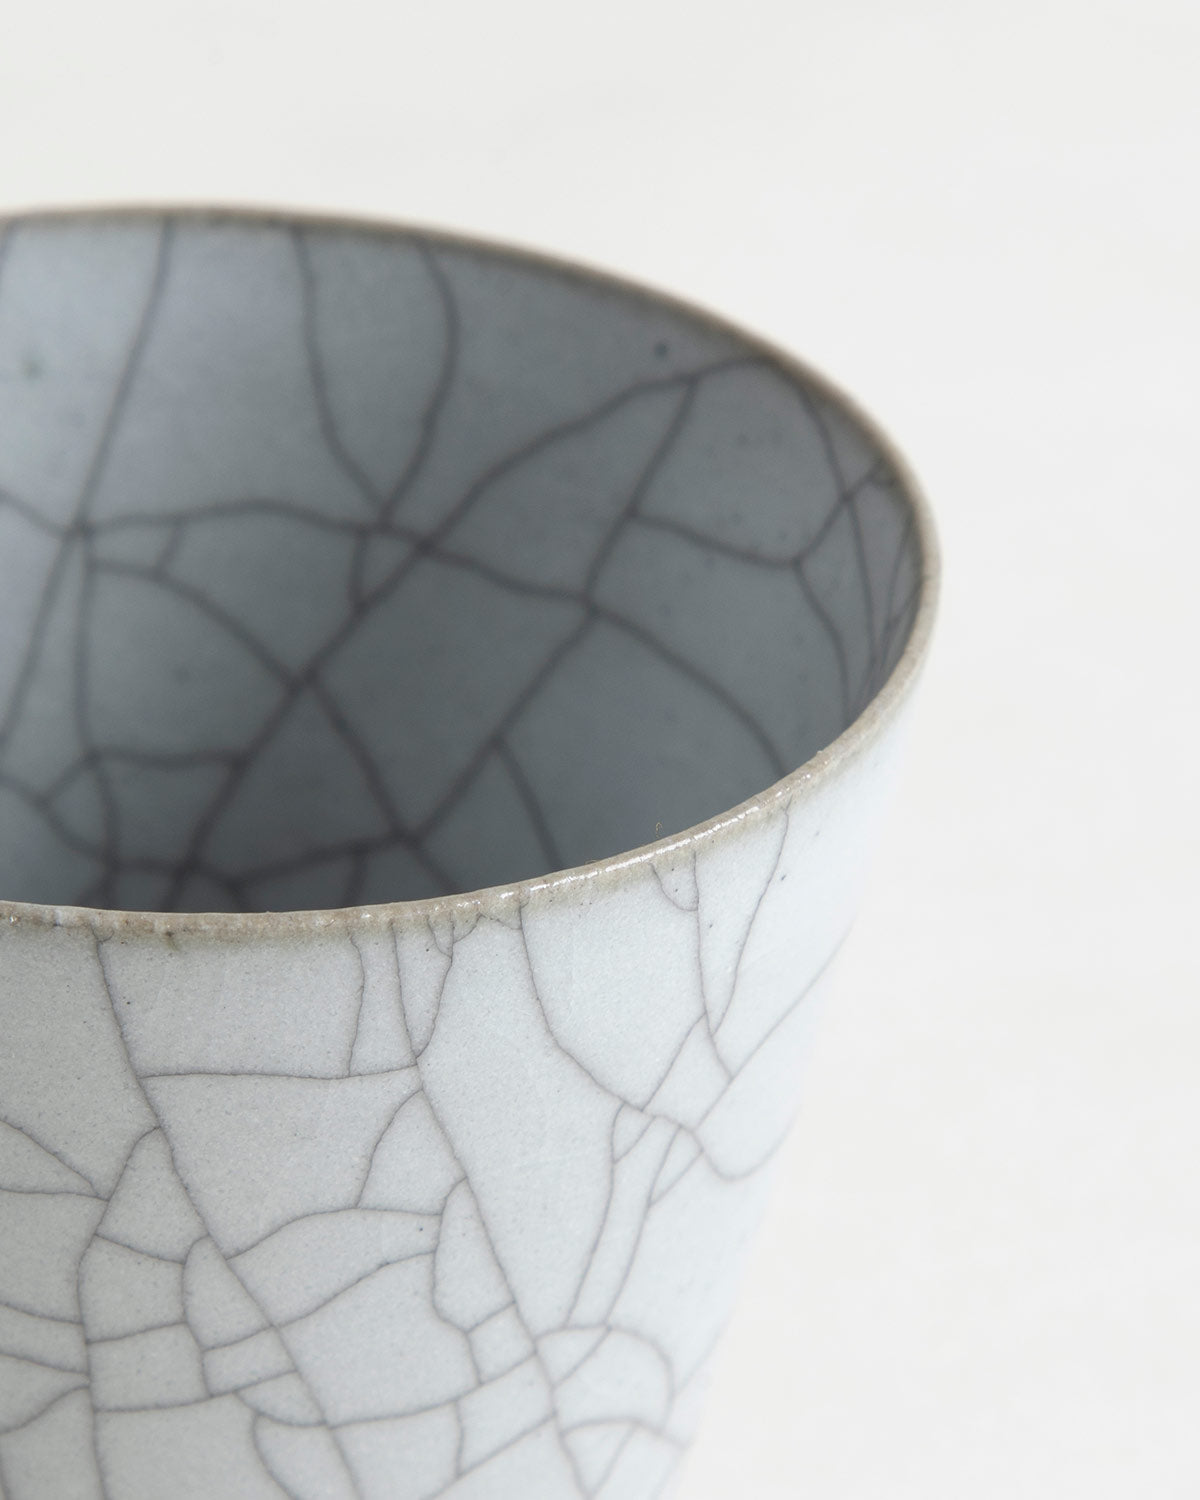 CHARCOAL CUP SMALL